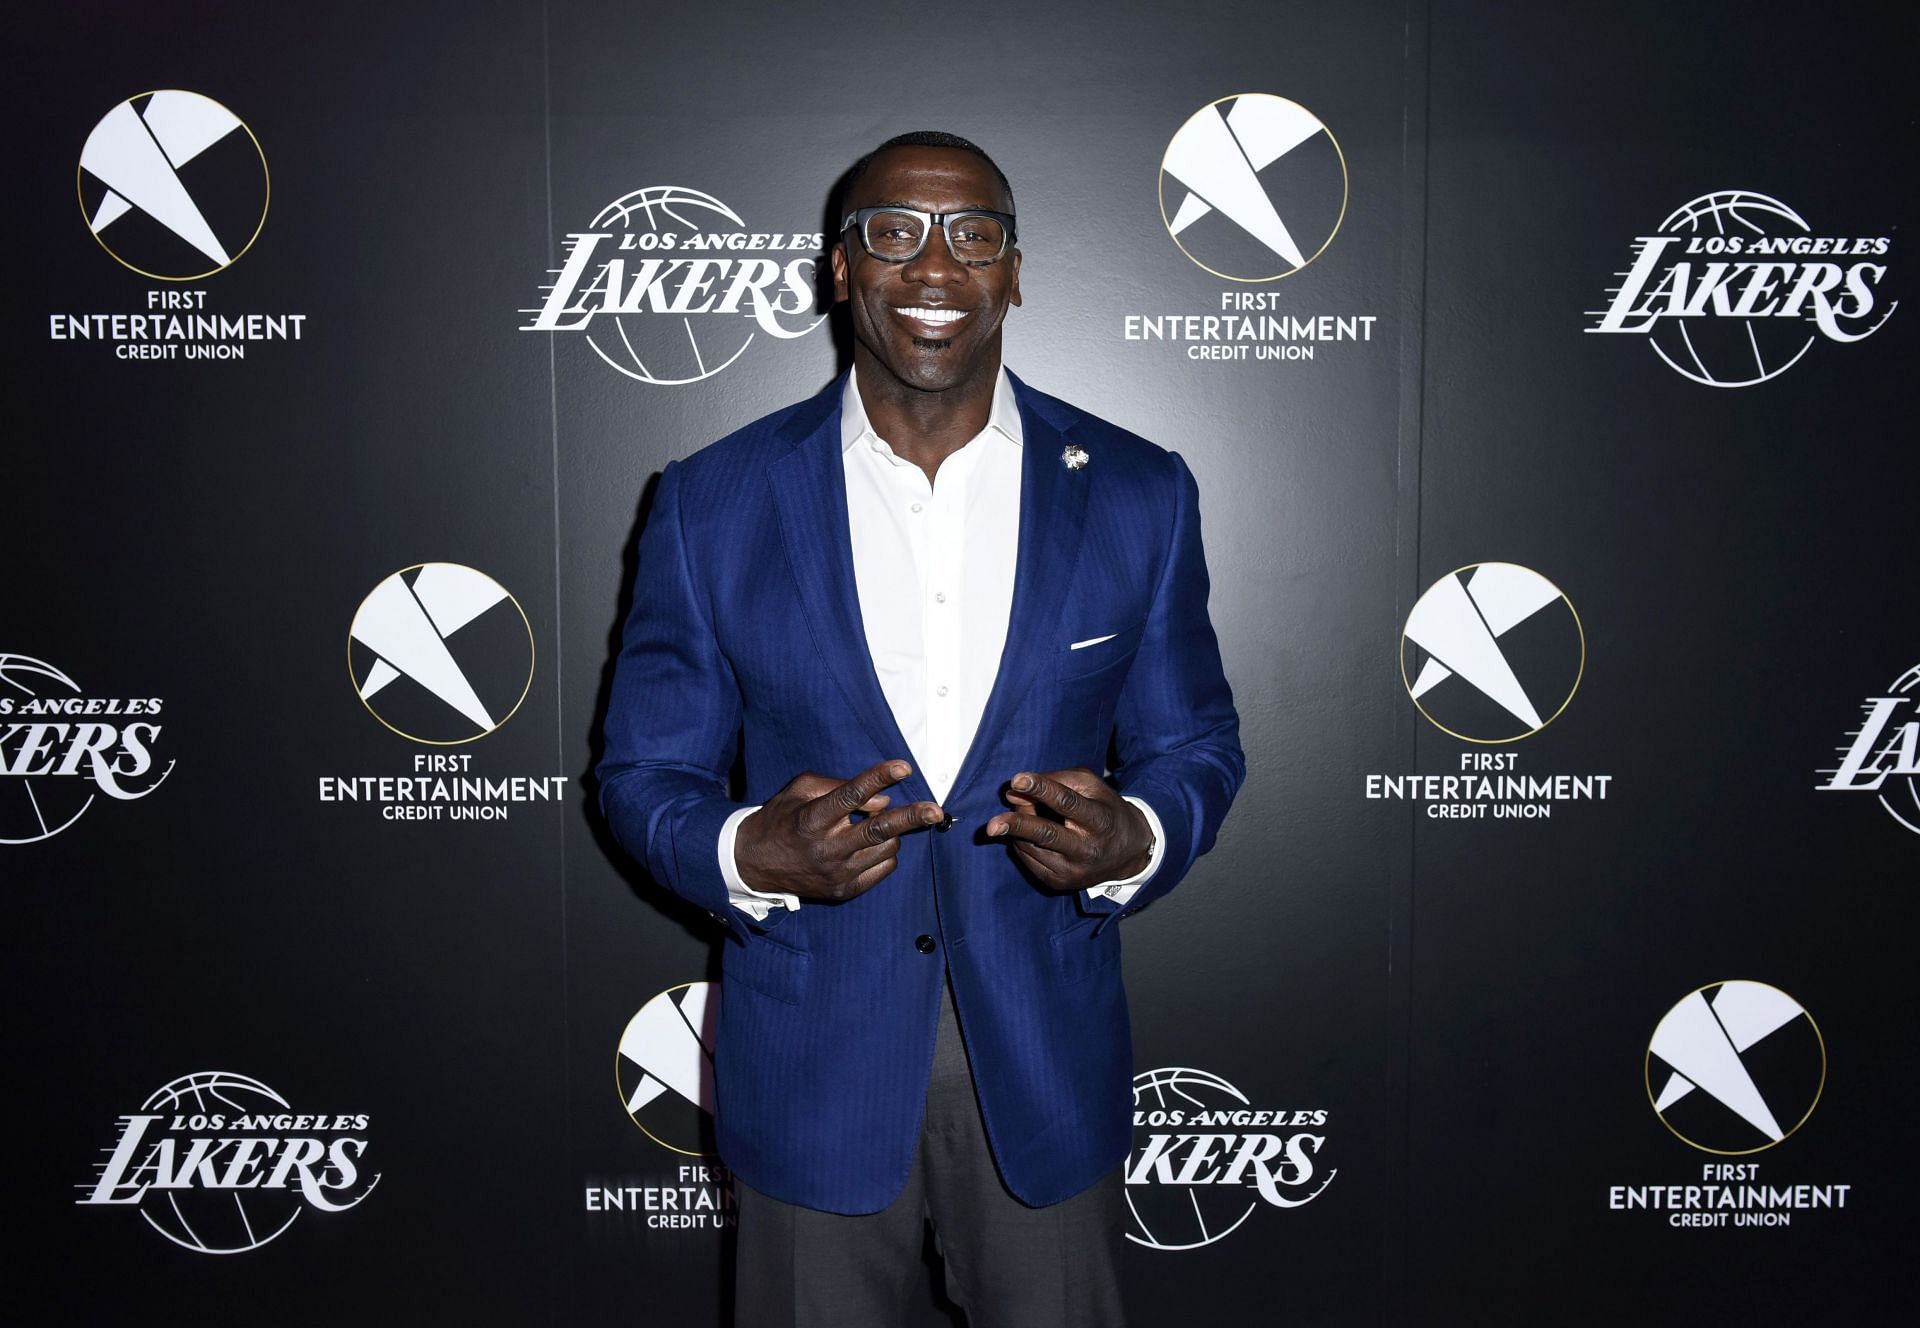 Shannon Sharpe was inducted into the Hall of Fame in 2011